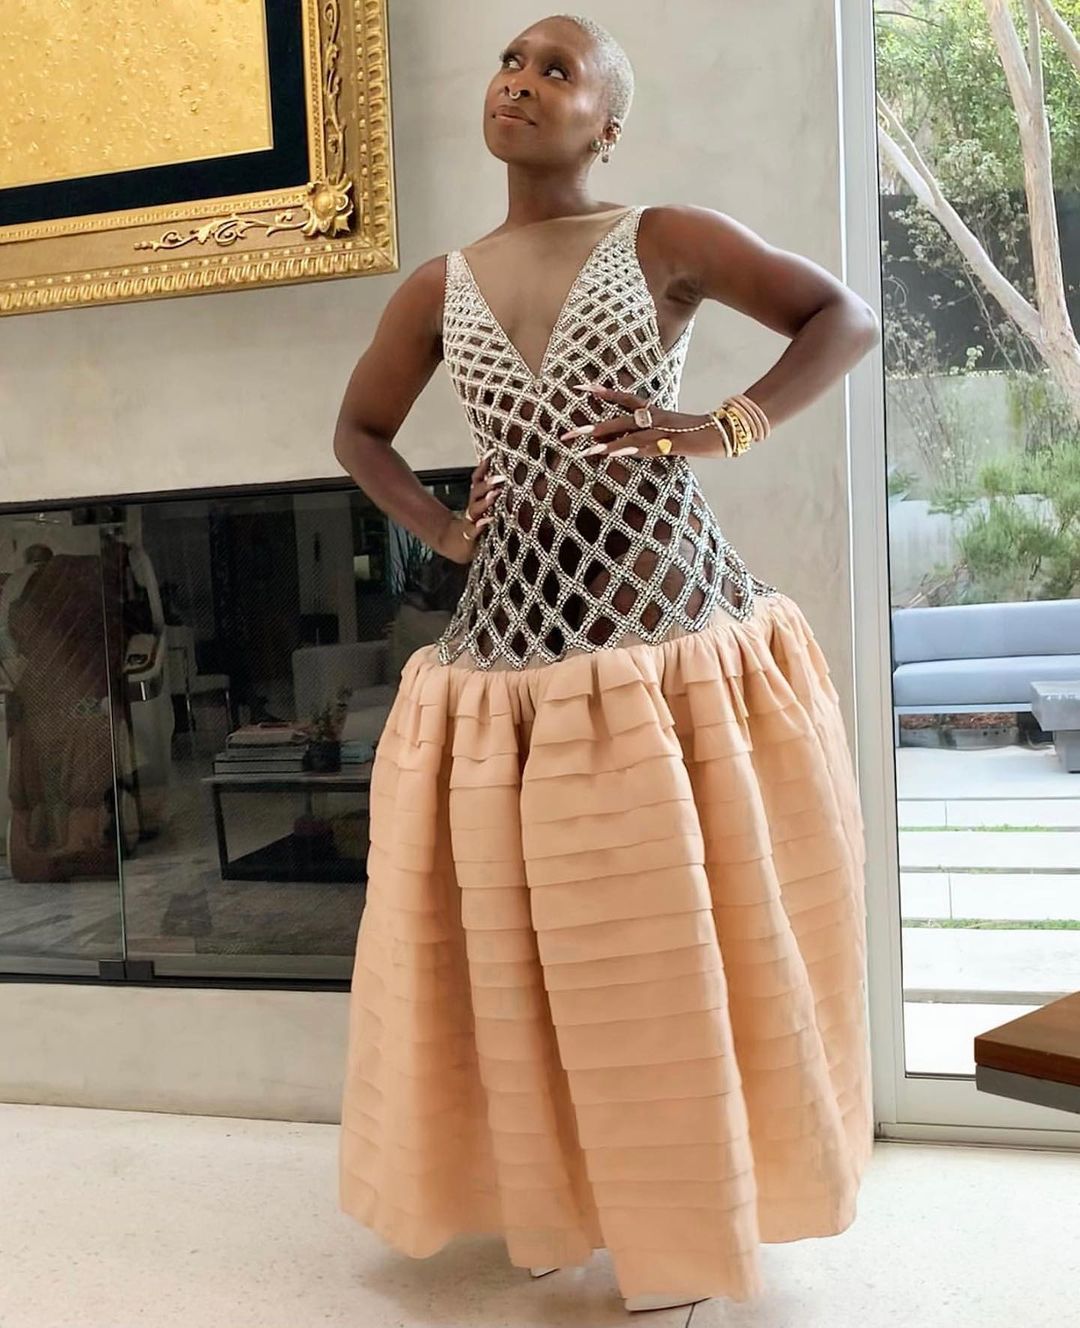 Thee Best NAACP Image Awards Fashion Moments